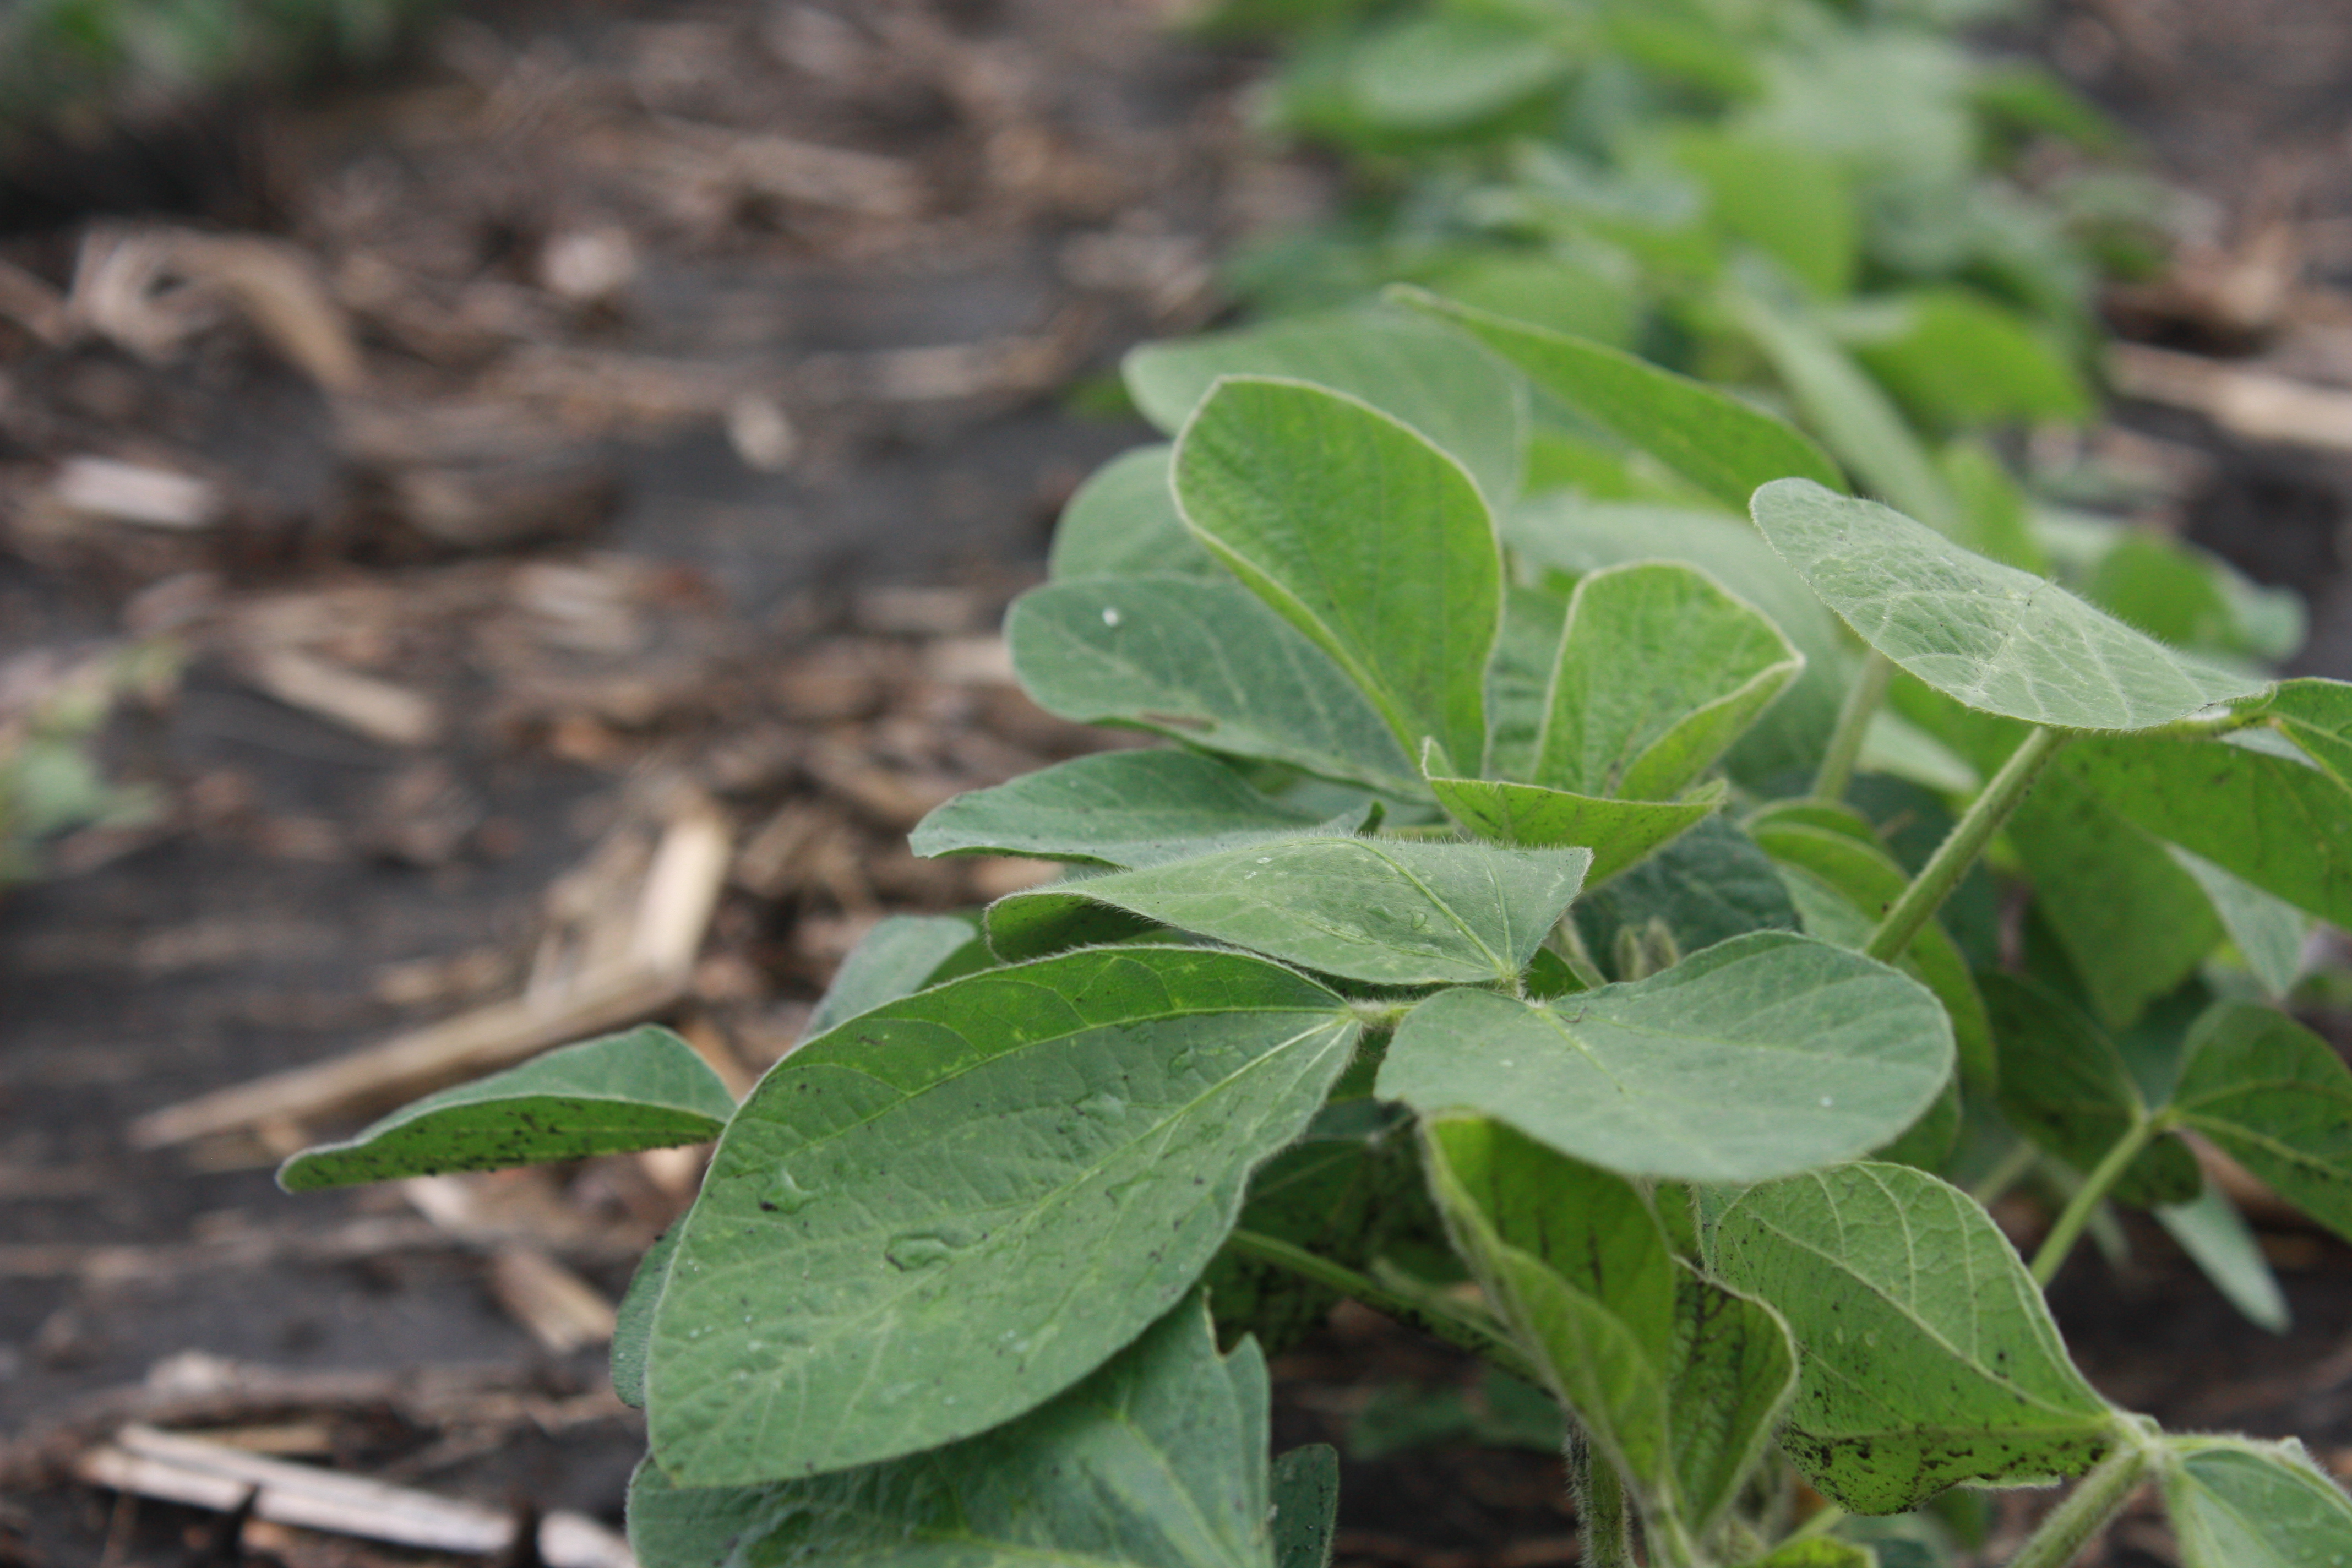 This agronomic image shows a close-up of a soybean plant.